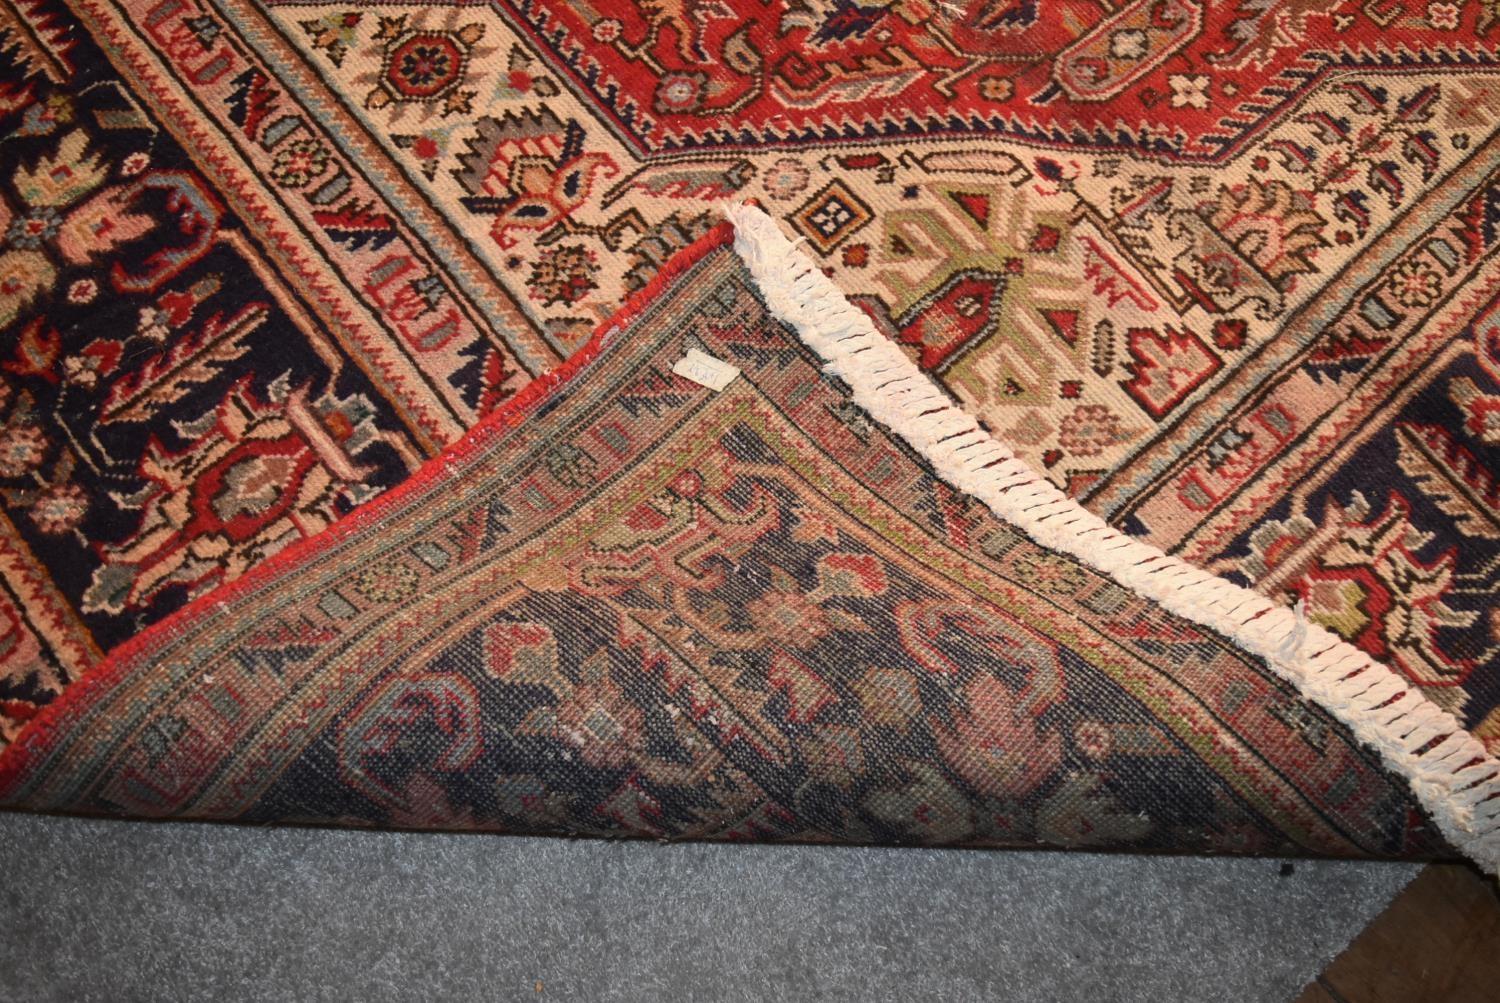 A Persian Tabriz carpet with floral central double pendant medallion surrounded by spandrels on a - Image 4 of 4